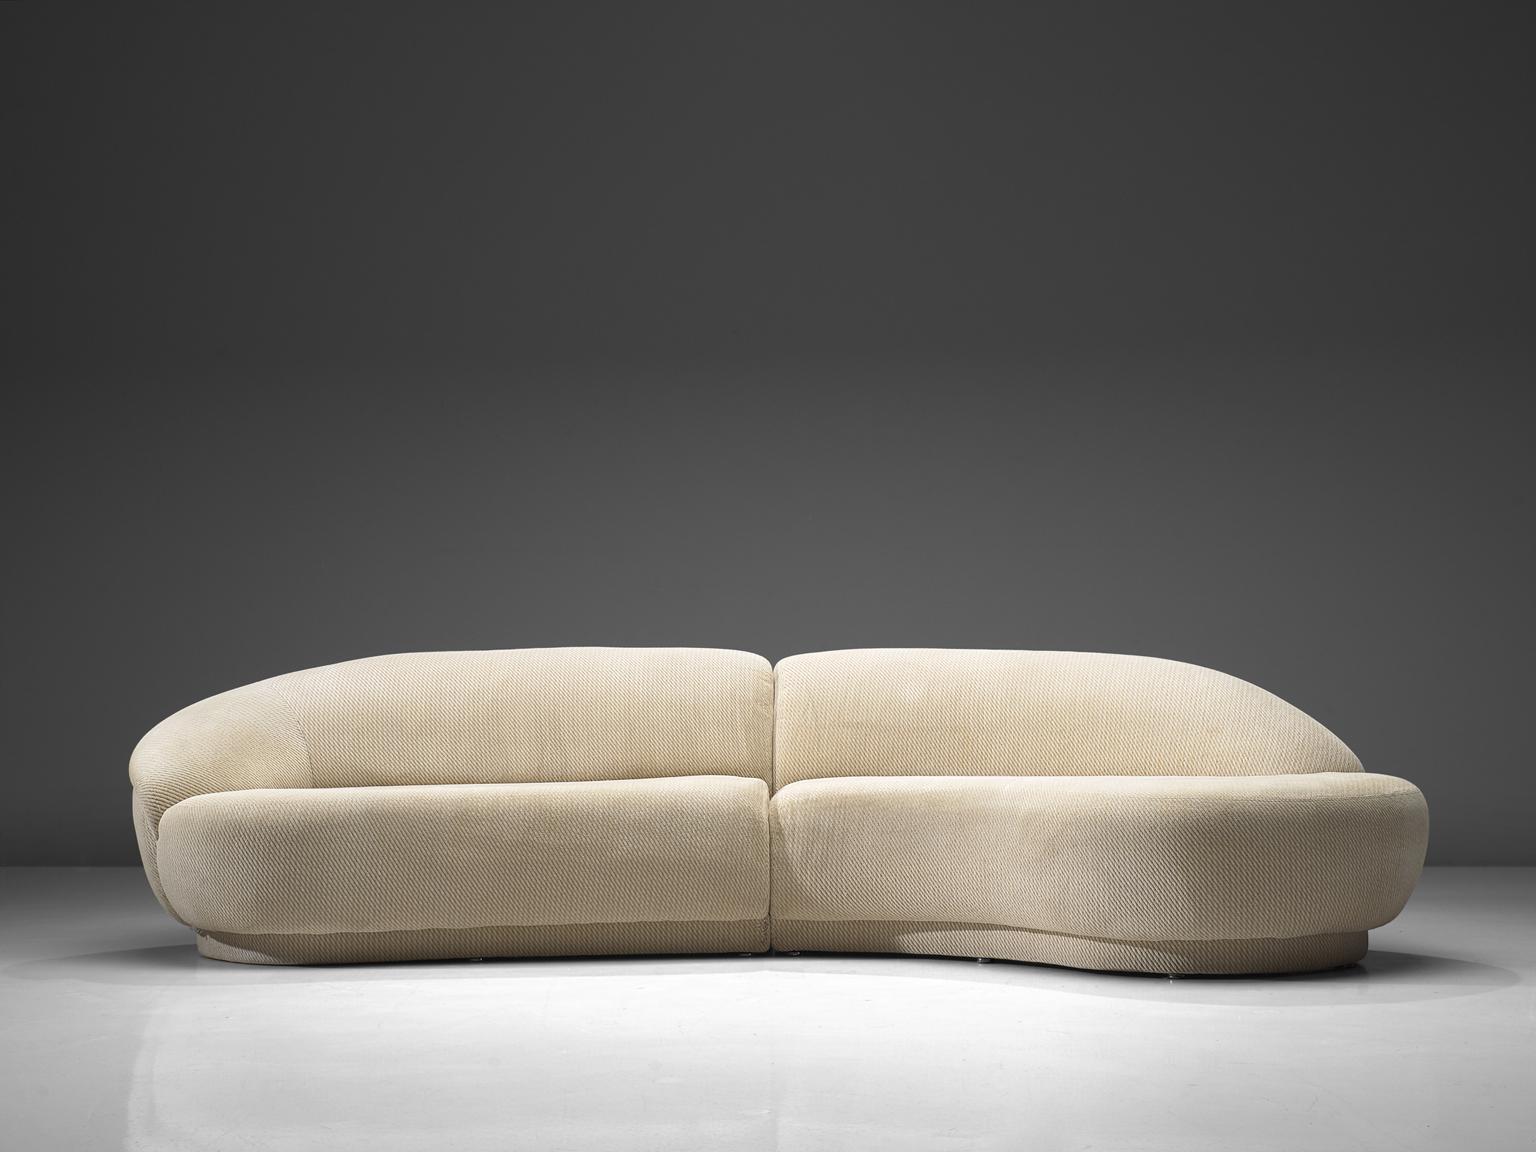 Milo Baughman for Thayer-Coggin, two-piece Serpentine sectional curved sofa, United States, 1970s.

This outstanding Milo Baughman two-piece Serpentine sectional curved sofa is a wonderful example of Baughman's design skills. With it's bulky round